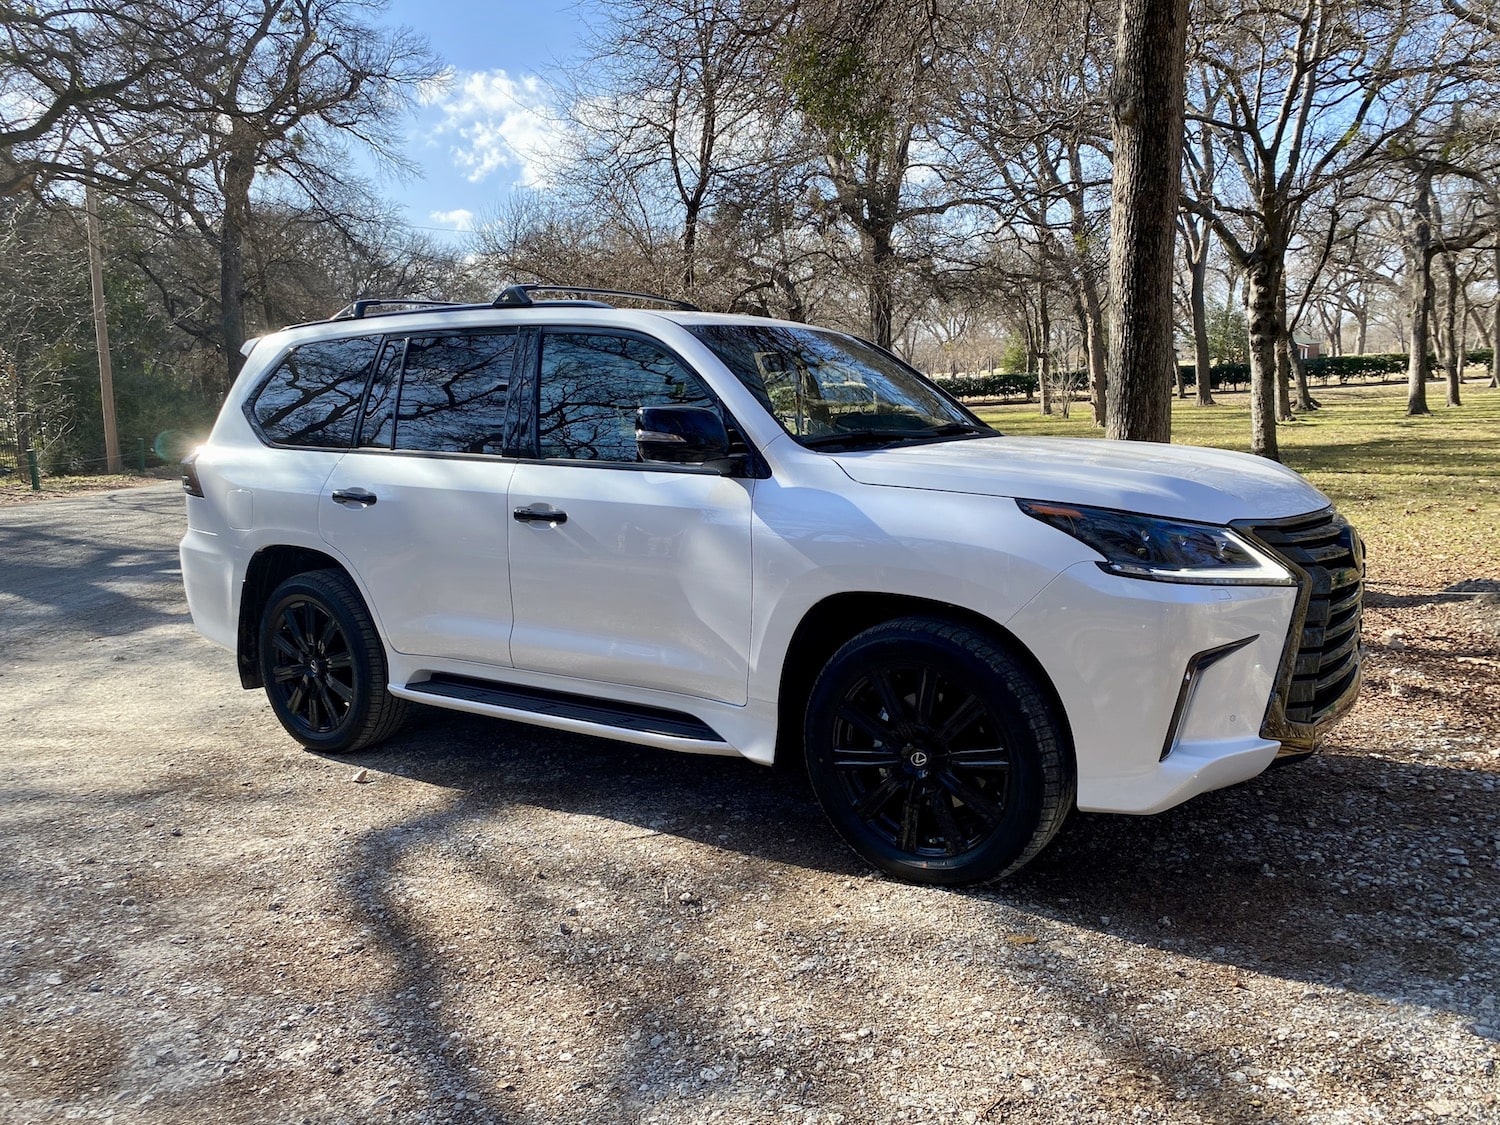 2021 Lexus LX Review, Pricing, & Pictures